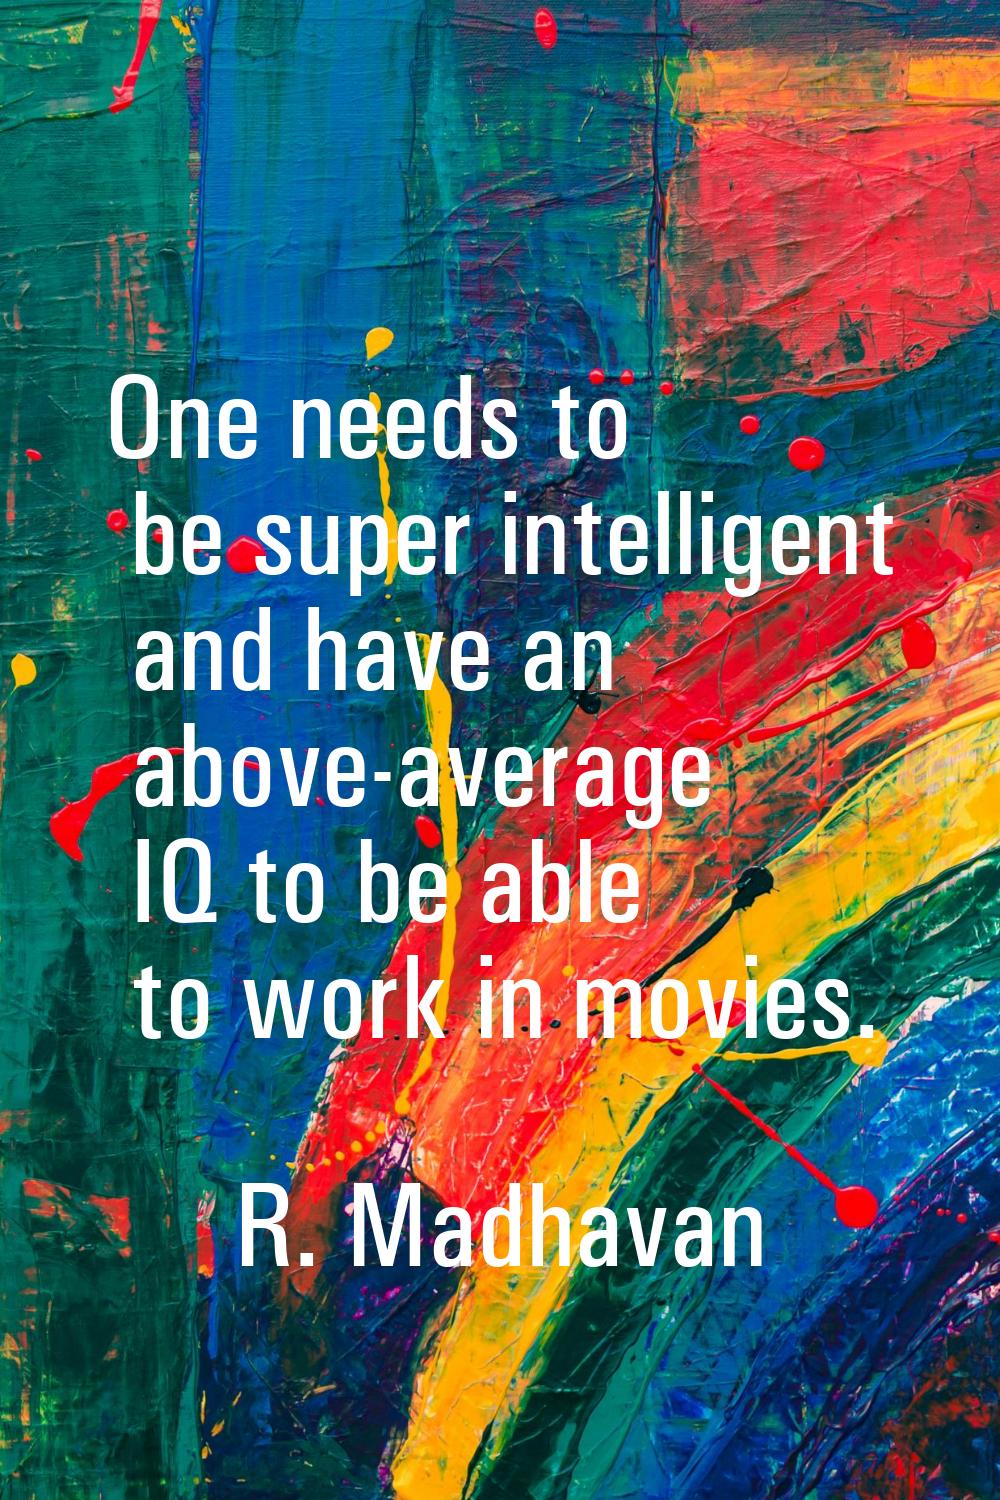 One needs to be super intelligent and have an above-average IQ to be able to work in movies.